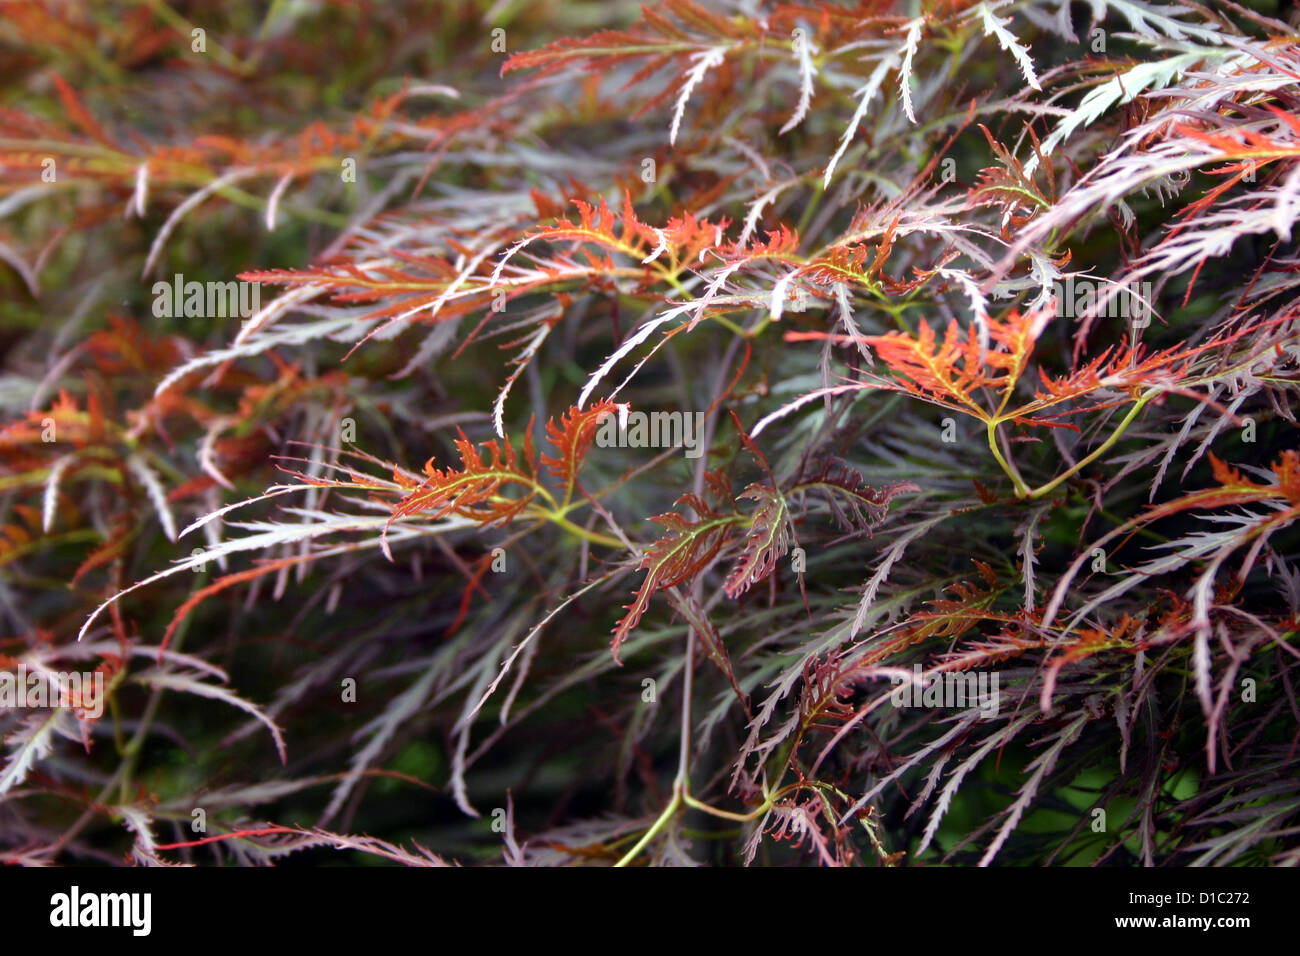 Japanese maple, lace leaf in red, brown, bronze, fall colors Stock Photo